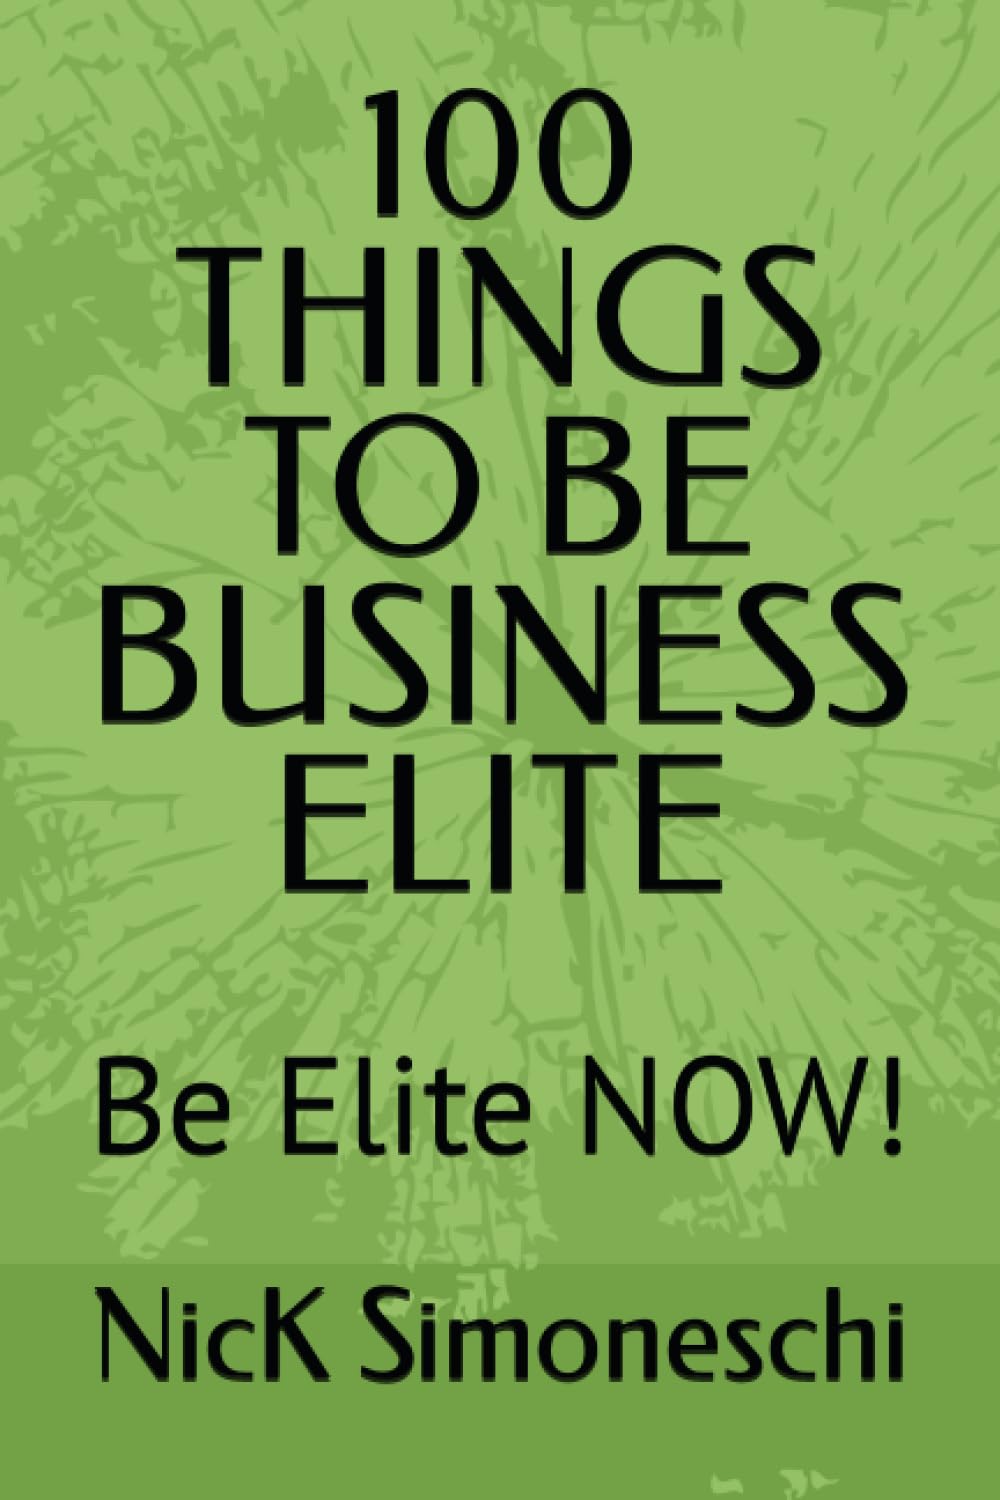 100 THINGS TO BE BUSINESS ELITE: Be Elite NOW!